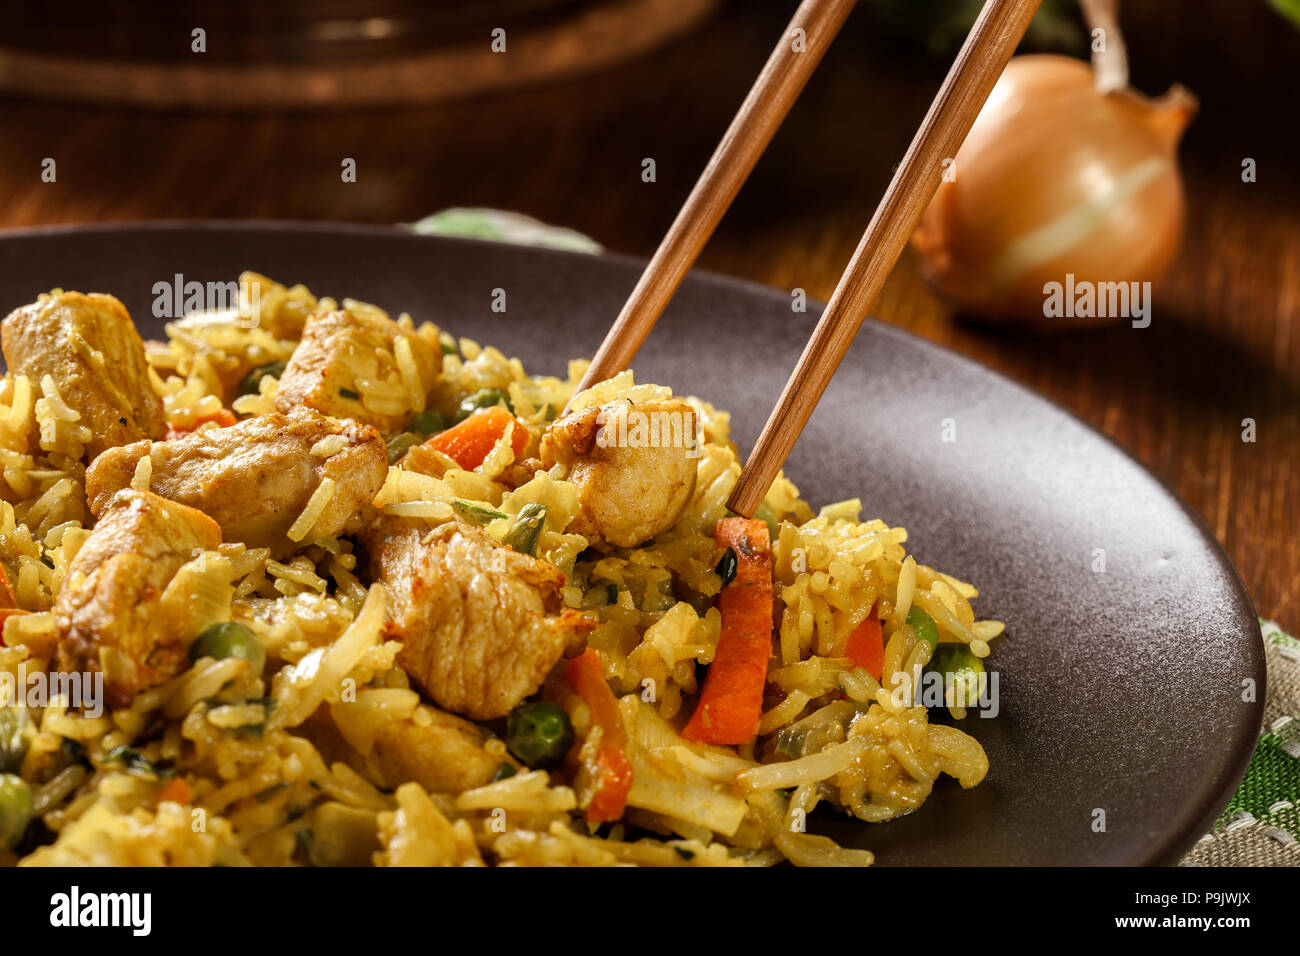 Fried rice nasi goreng with chicken and vegetables on a plate. Indonesian cuisine. Stock Photo